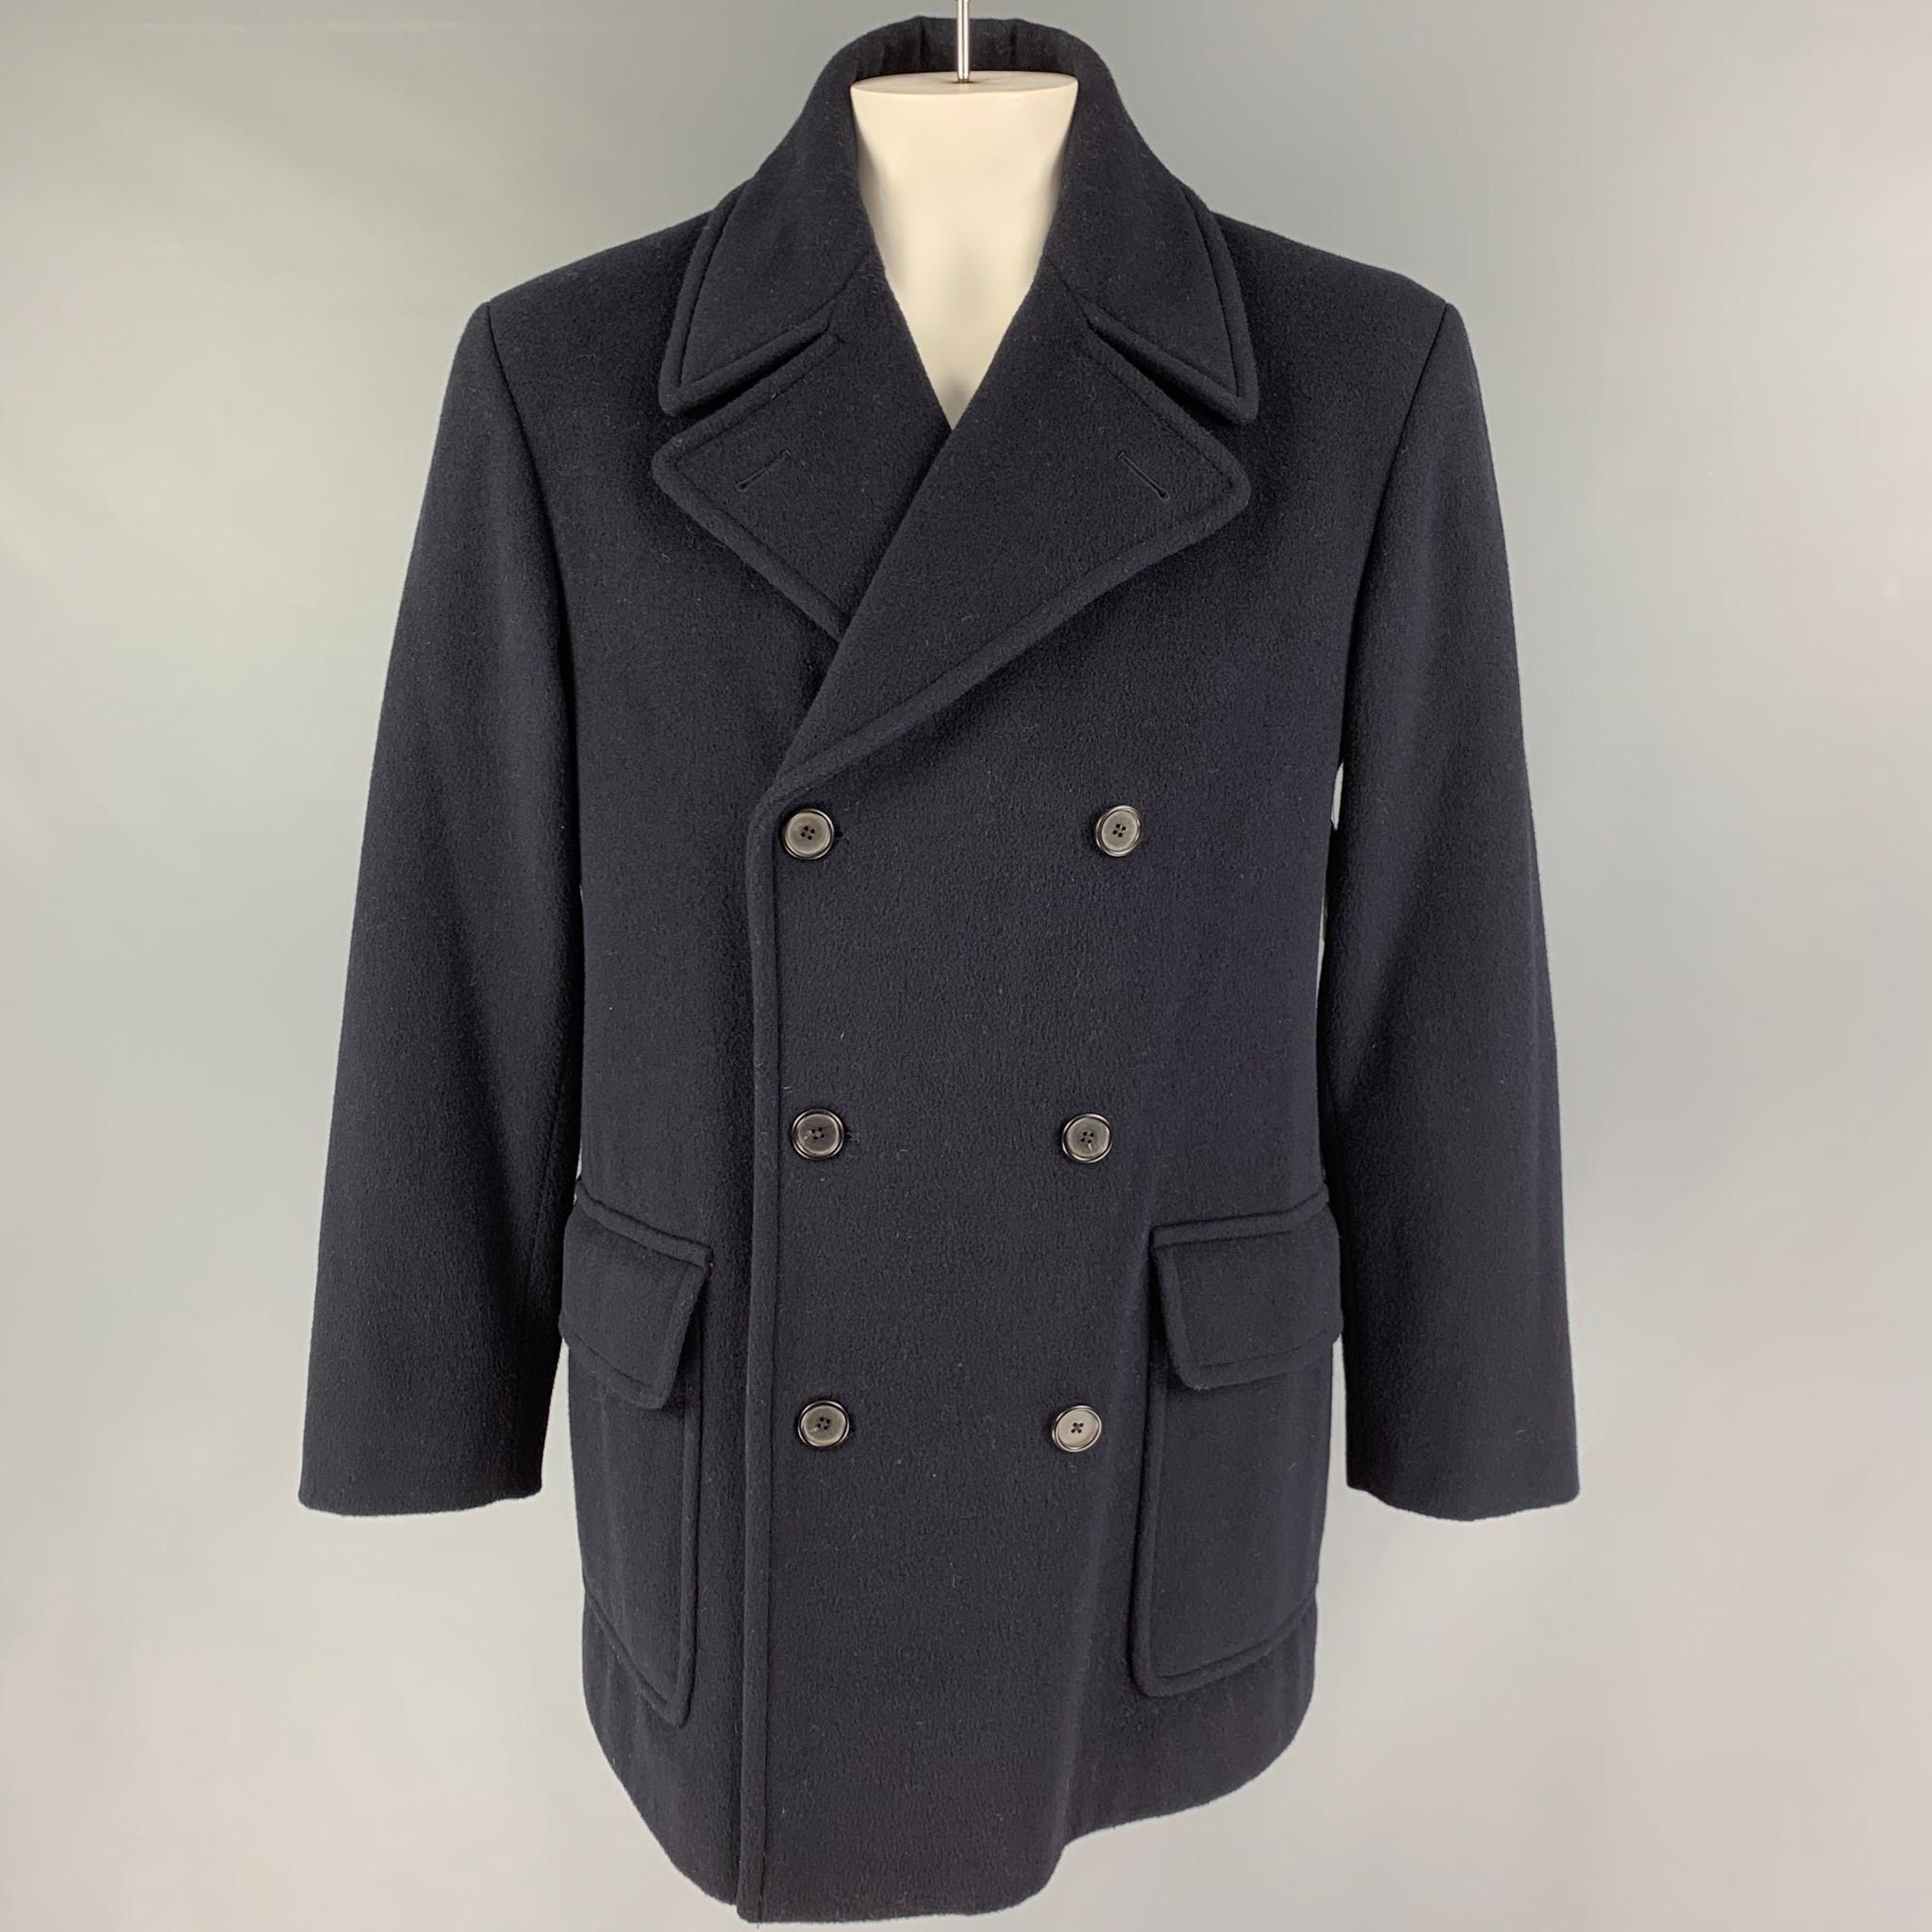 RALPH LAUREN 'Purple Label' coat comes in a navy lana wool with a full liner featuring a notch lapel, storm flap, flap pockets, and a double breasted closure. Made in Italy.

Very Good Pre-Owned Condition.
Marked: L

Measurements:

Shoulder: 20